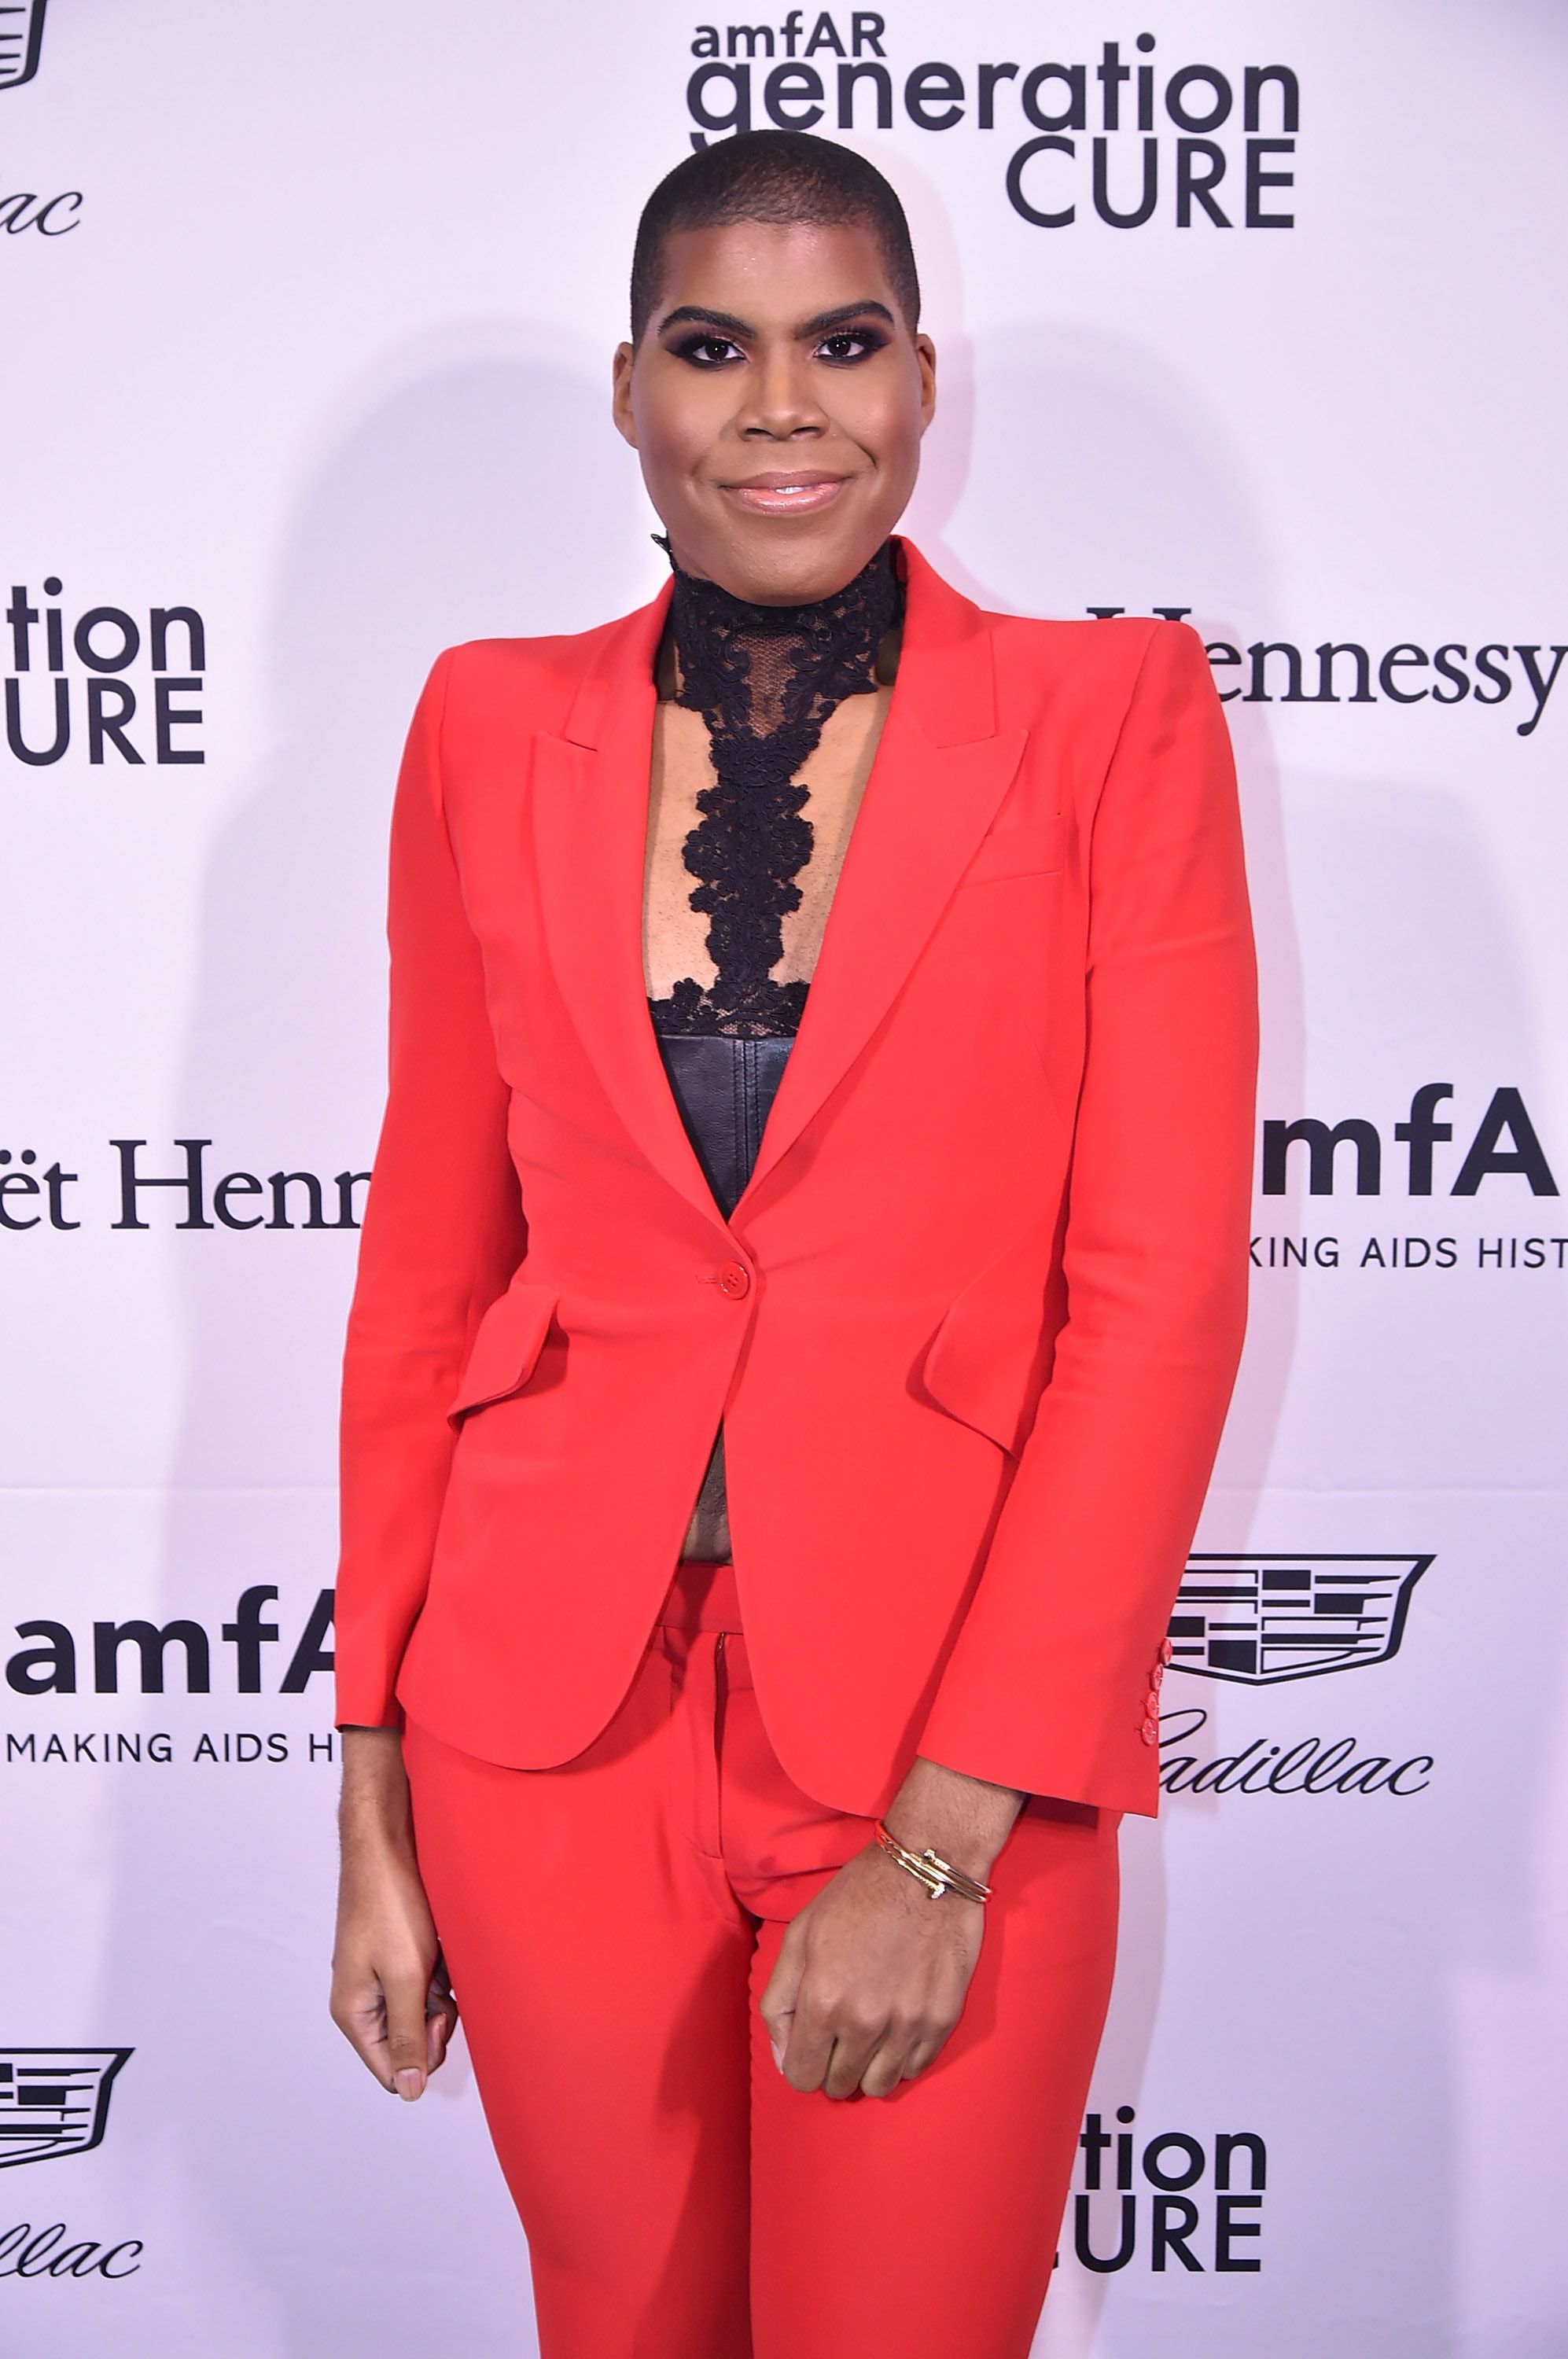 EJ Johnson at the amfAR GenerationCure Holiday Party at Cadillac House on December 7, 2016, in New York City | Photo: Theo Wargo/Getty Images